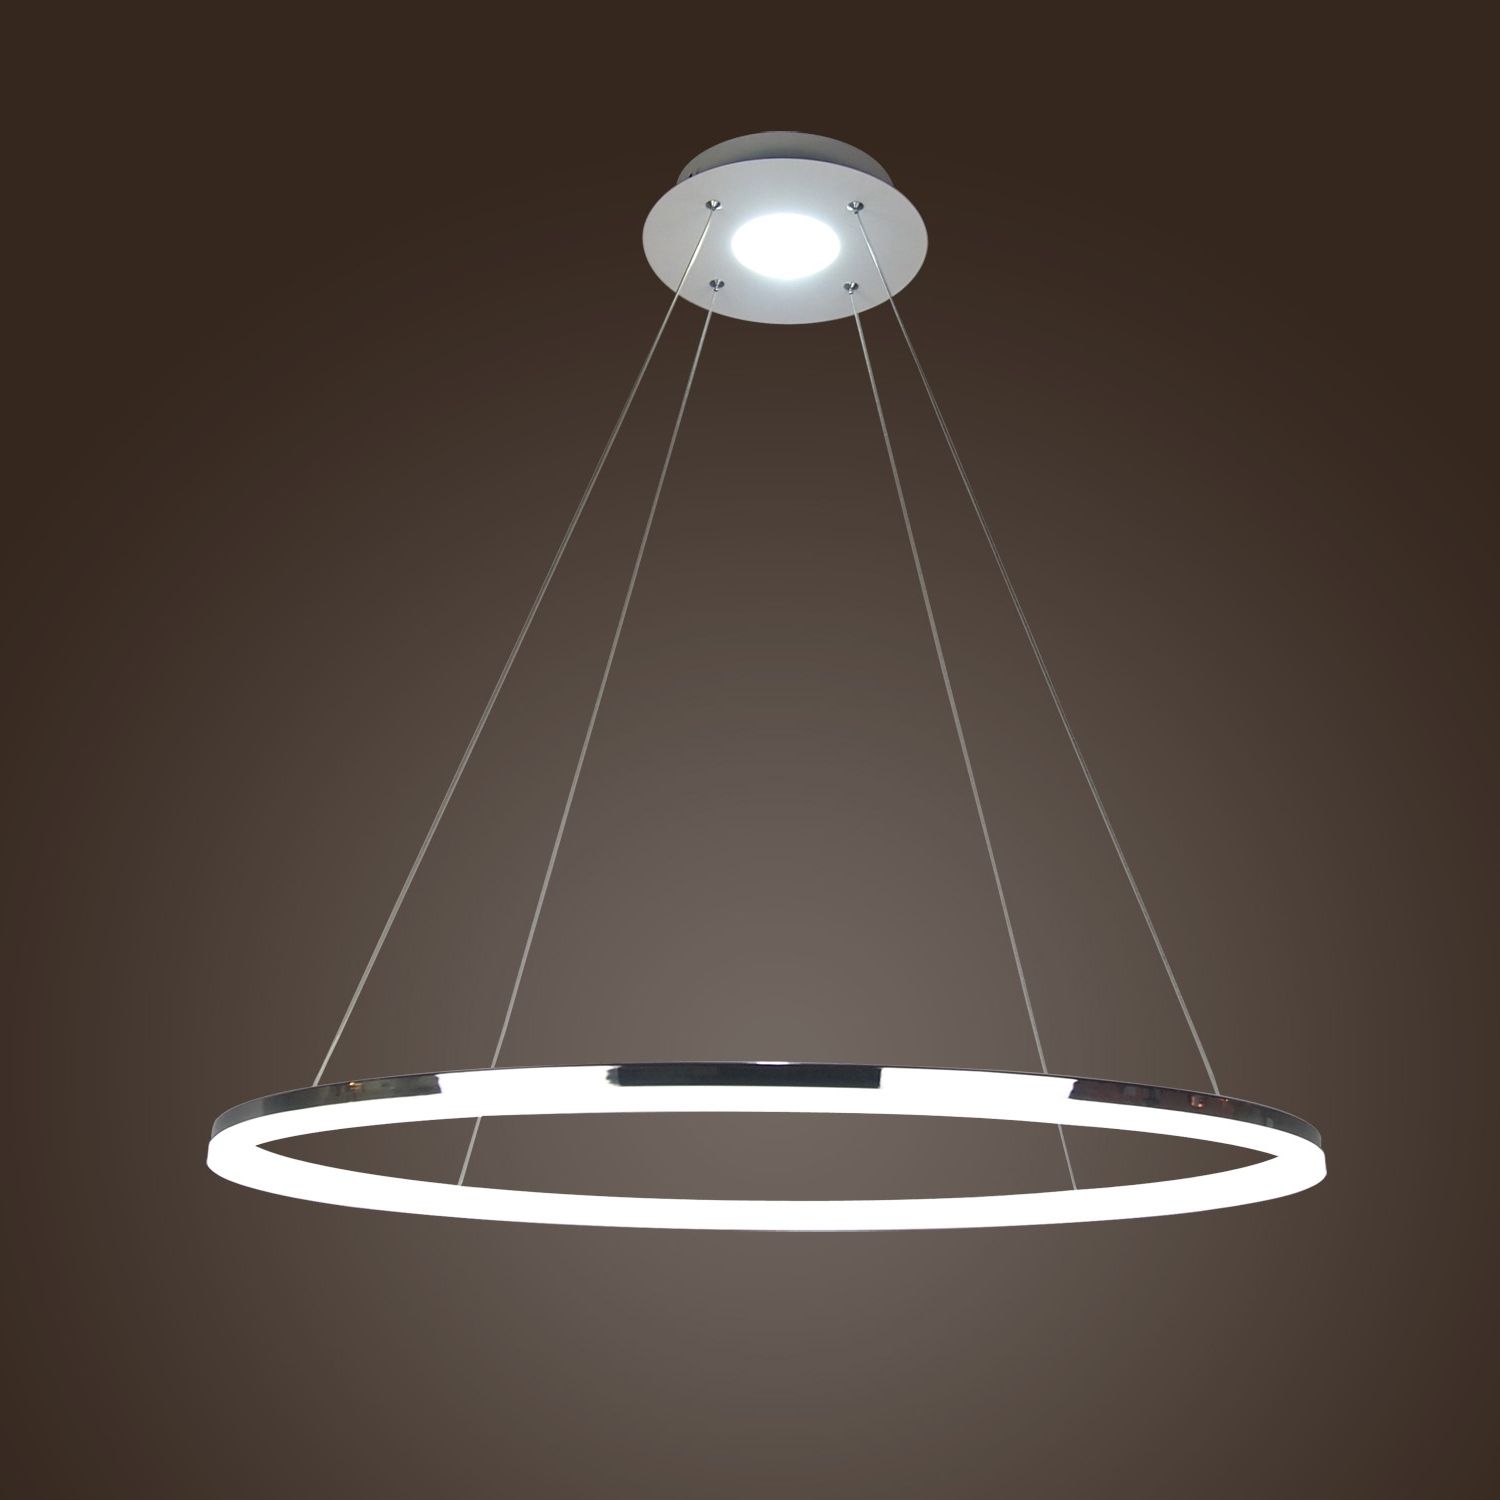 Outdoor Ceiling Lights From Australia Pertaining To Best And Newest Decorating : Outdoor Ceiling Light For Boats Led 00599wh Aaa World (View 12 of 20)